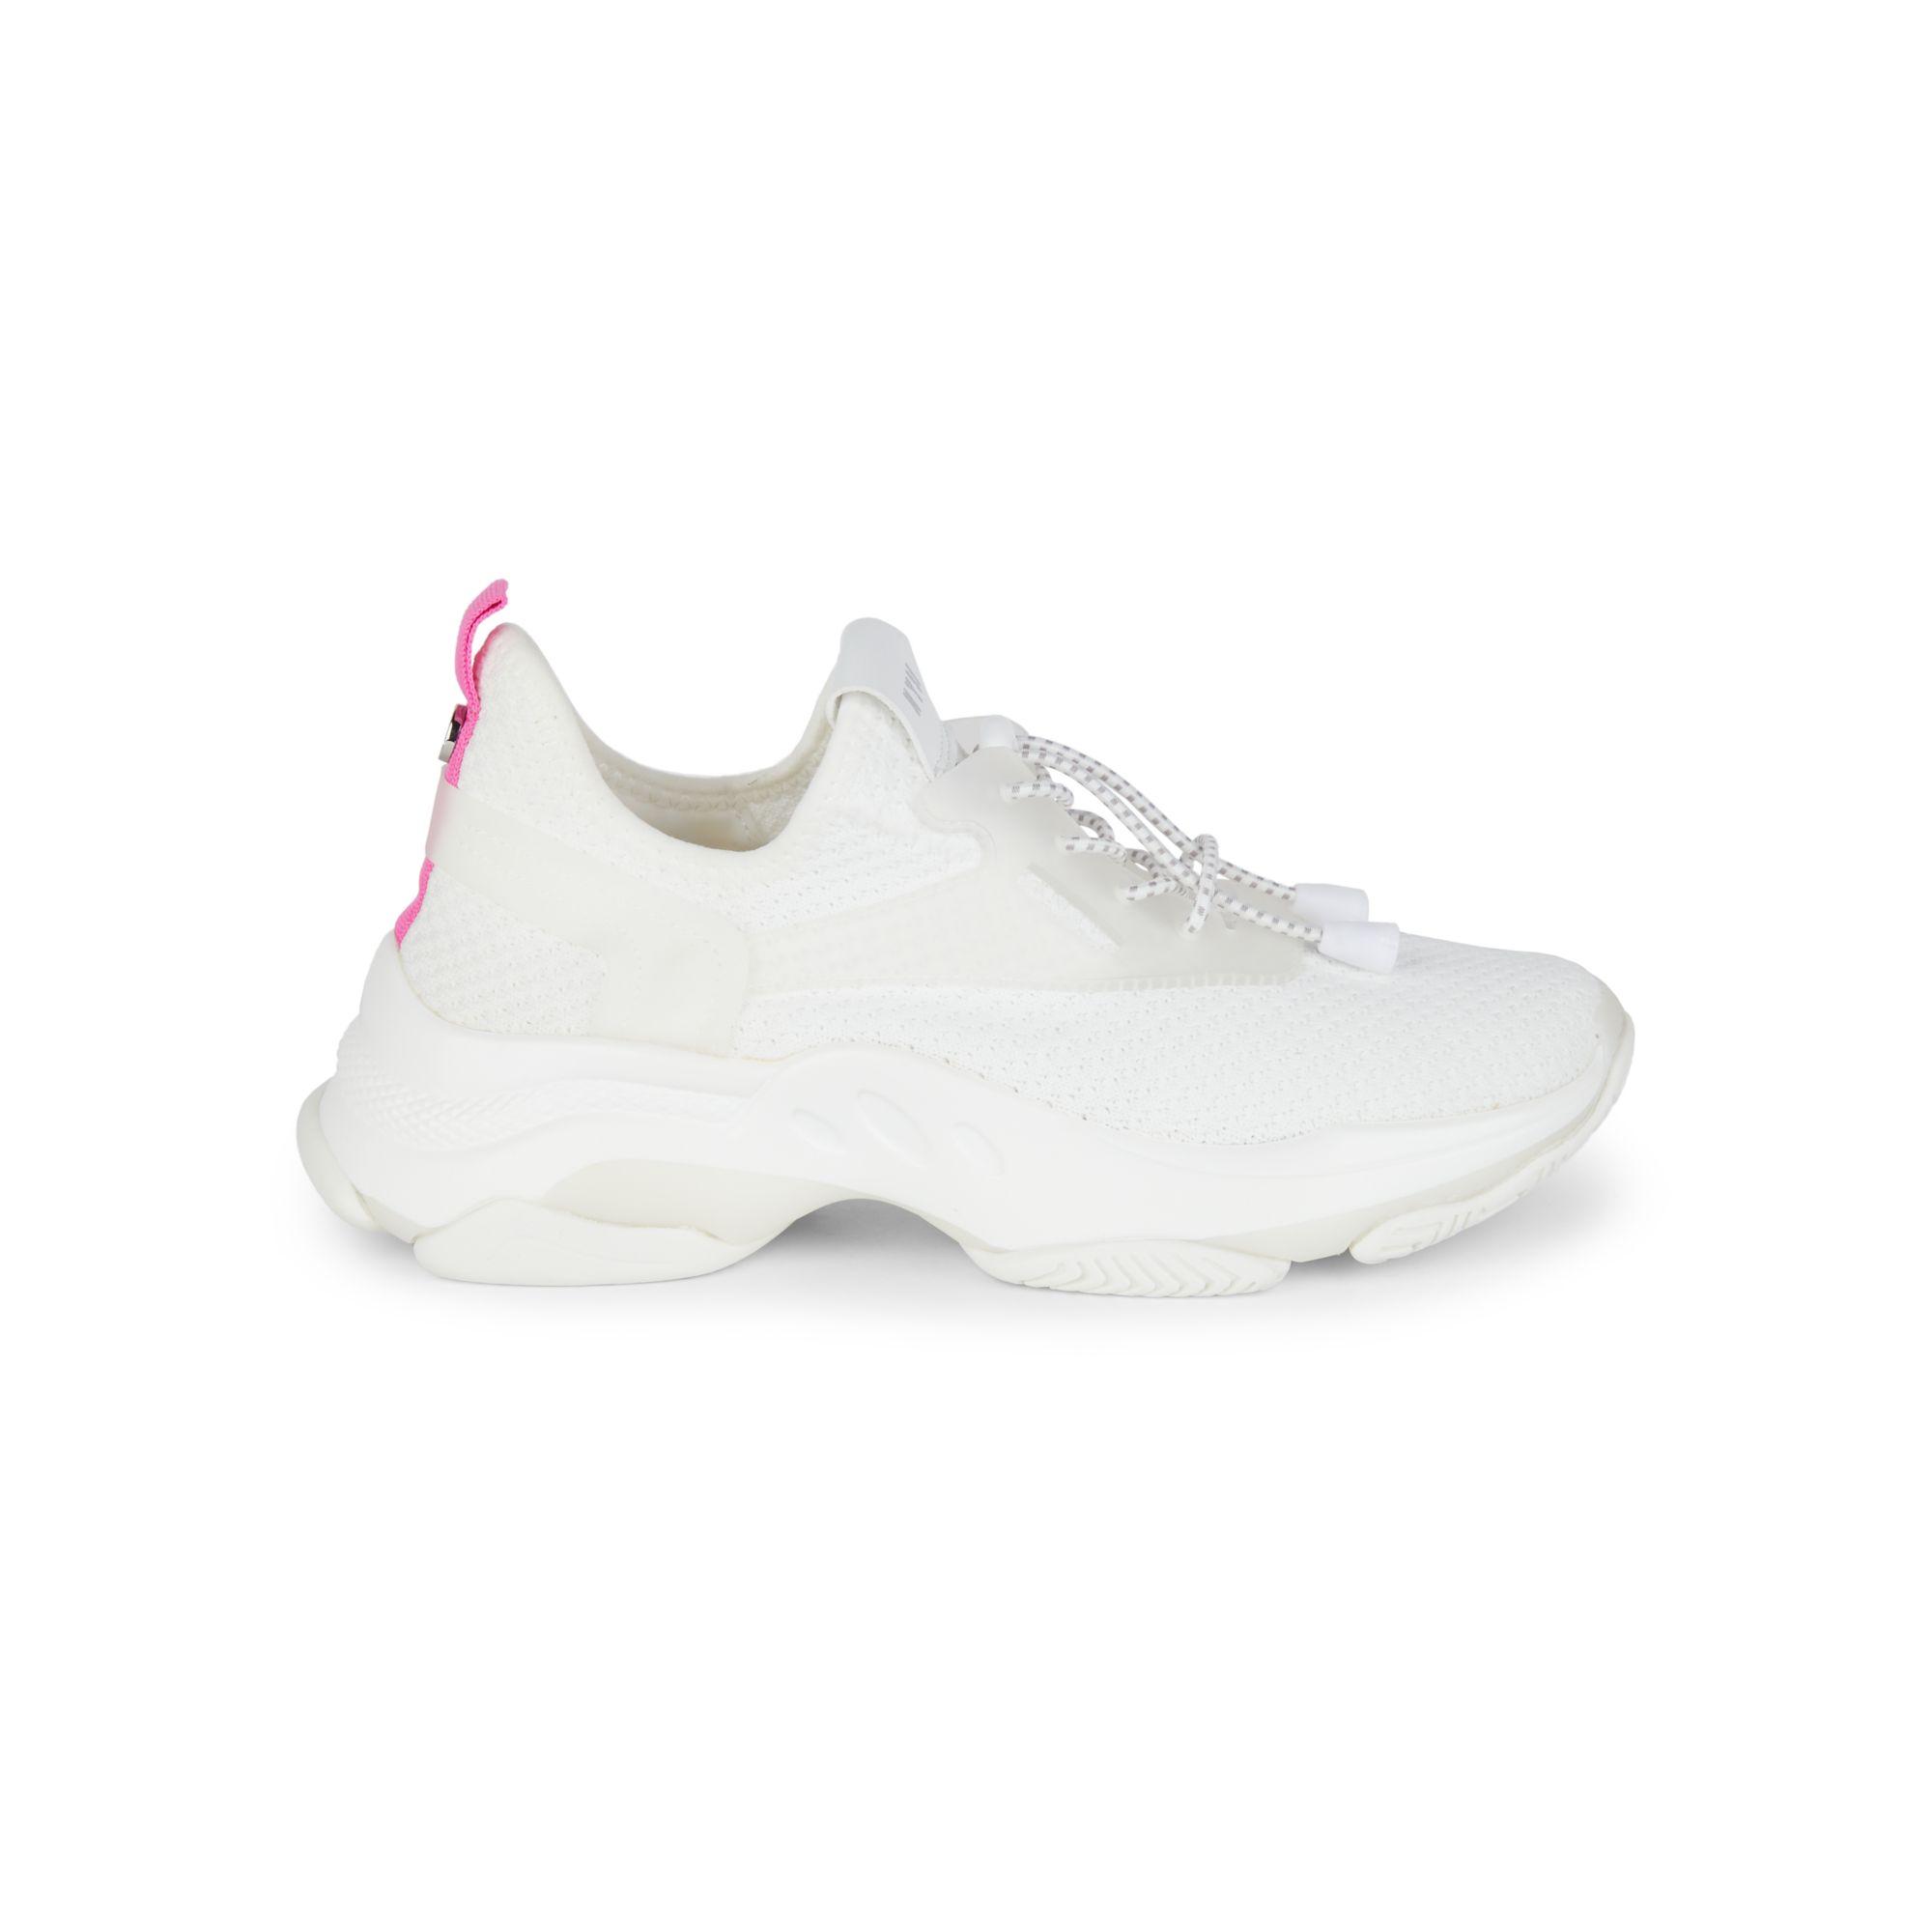 Steve Madden Synthetic Myles Chunky Sneakers in White - Lyst